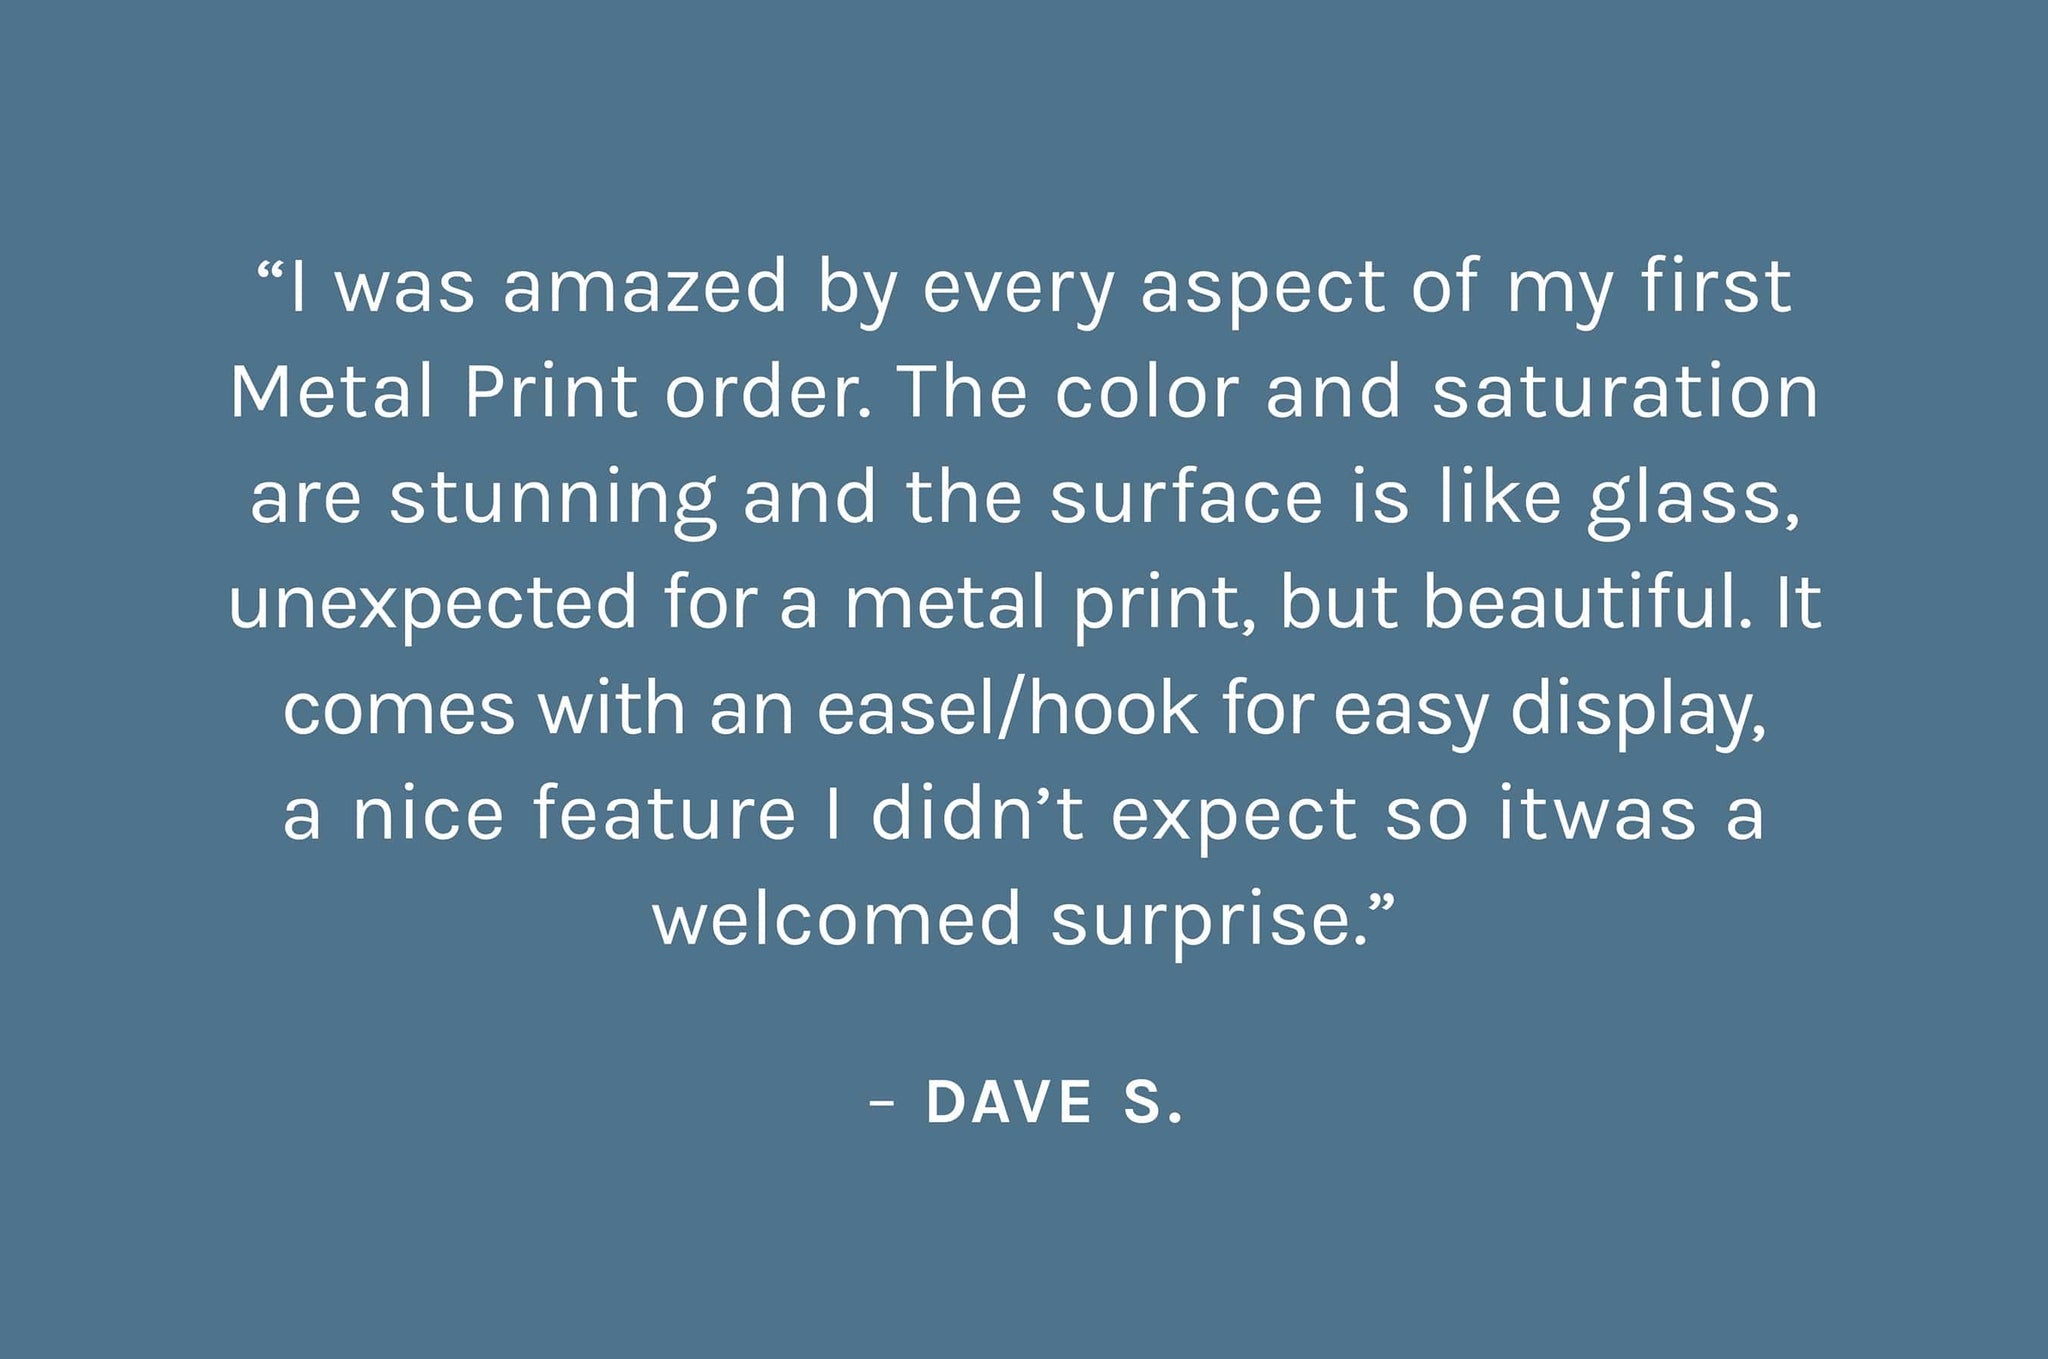 “I was amazed by every aspect of my first Metal Print order. The color and saturation are stunning and the surface is like glass, unexpected for a metal print, but beautiful. It comes with an easel/hook for easy display, a nice feature I didn’t expect so itwas a welcomed surprise.”  – Dave S.